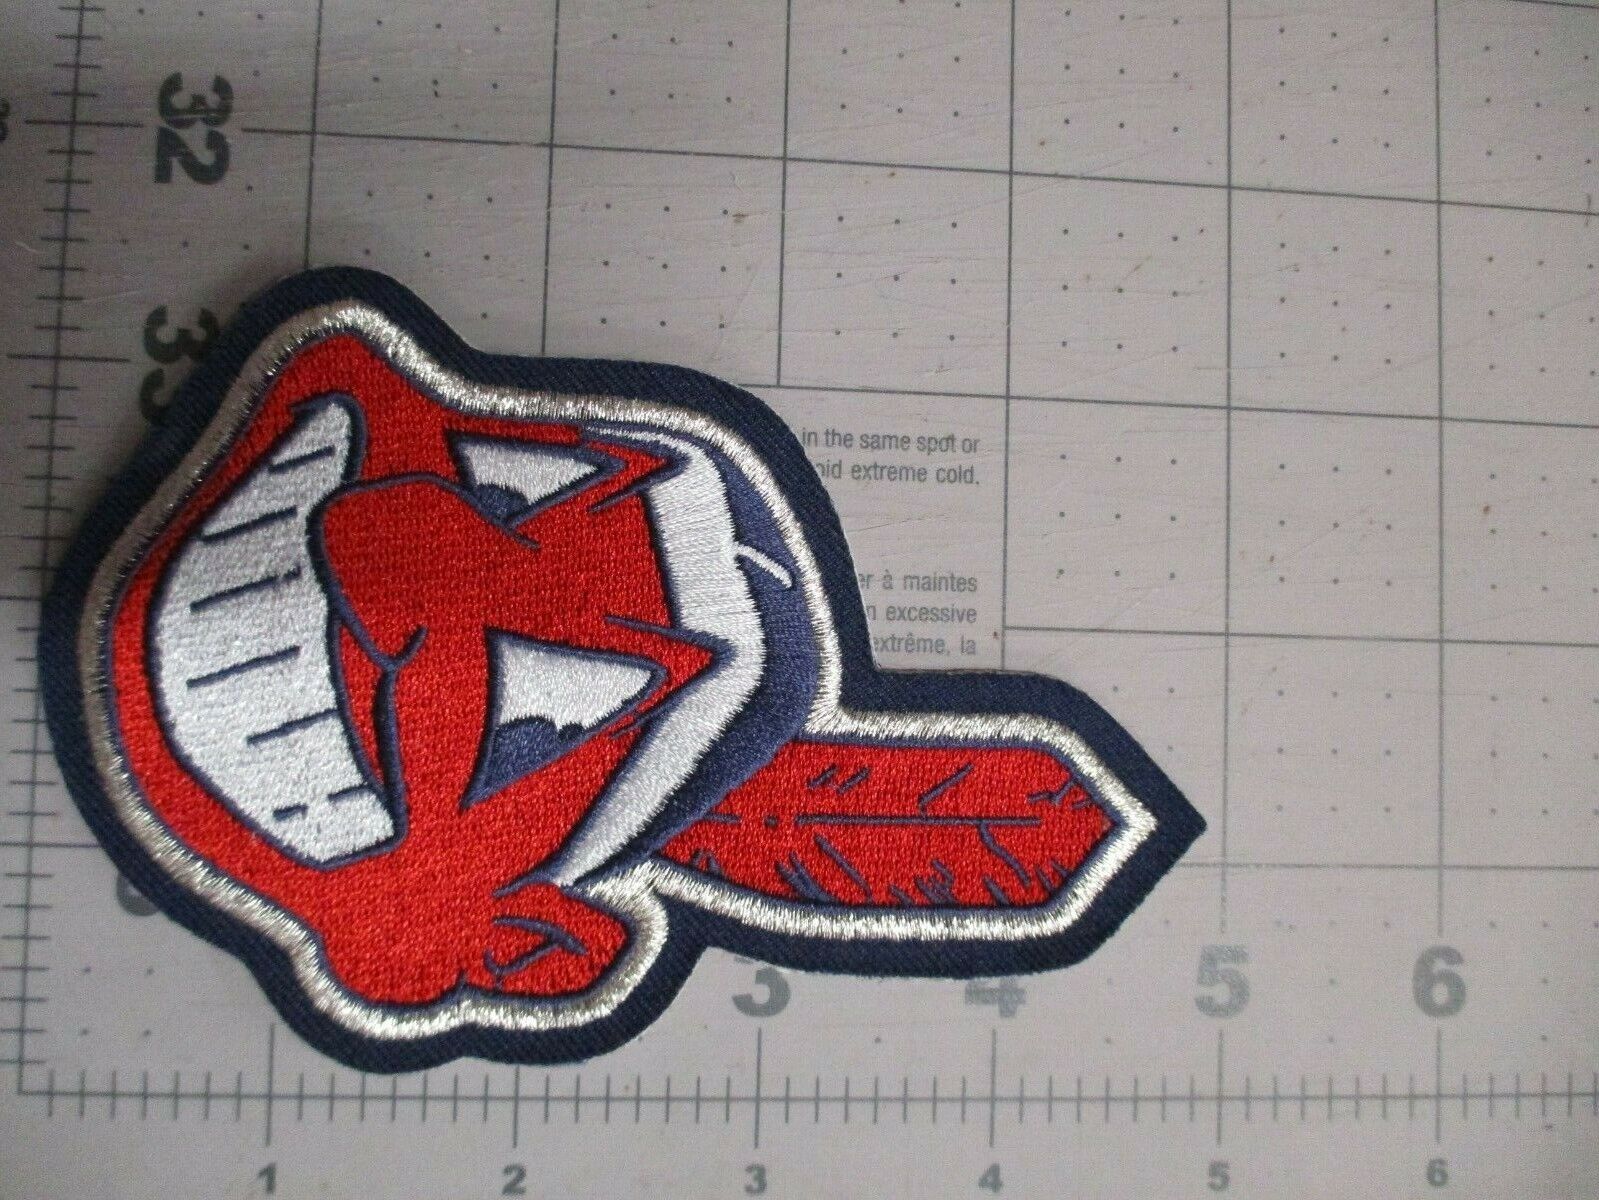 Cleveland Indians Chief Wahoo Logo Big Patch Size 3.25 x 5.0